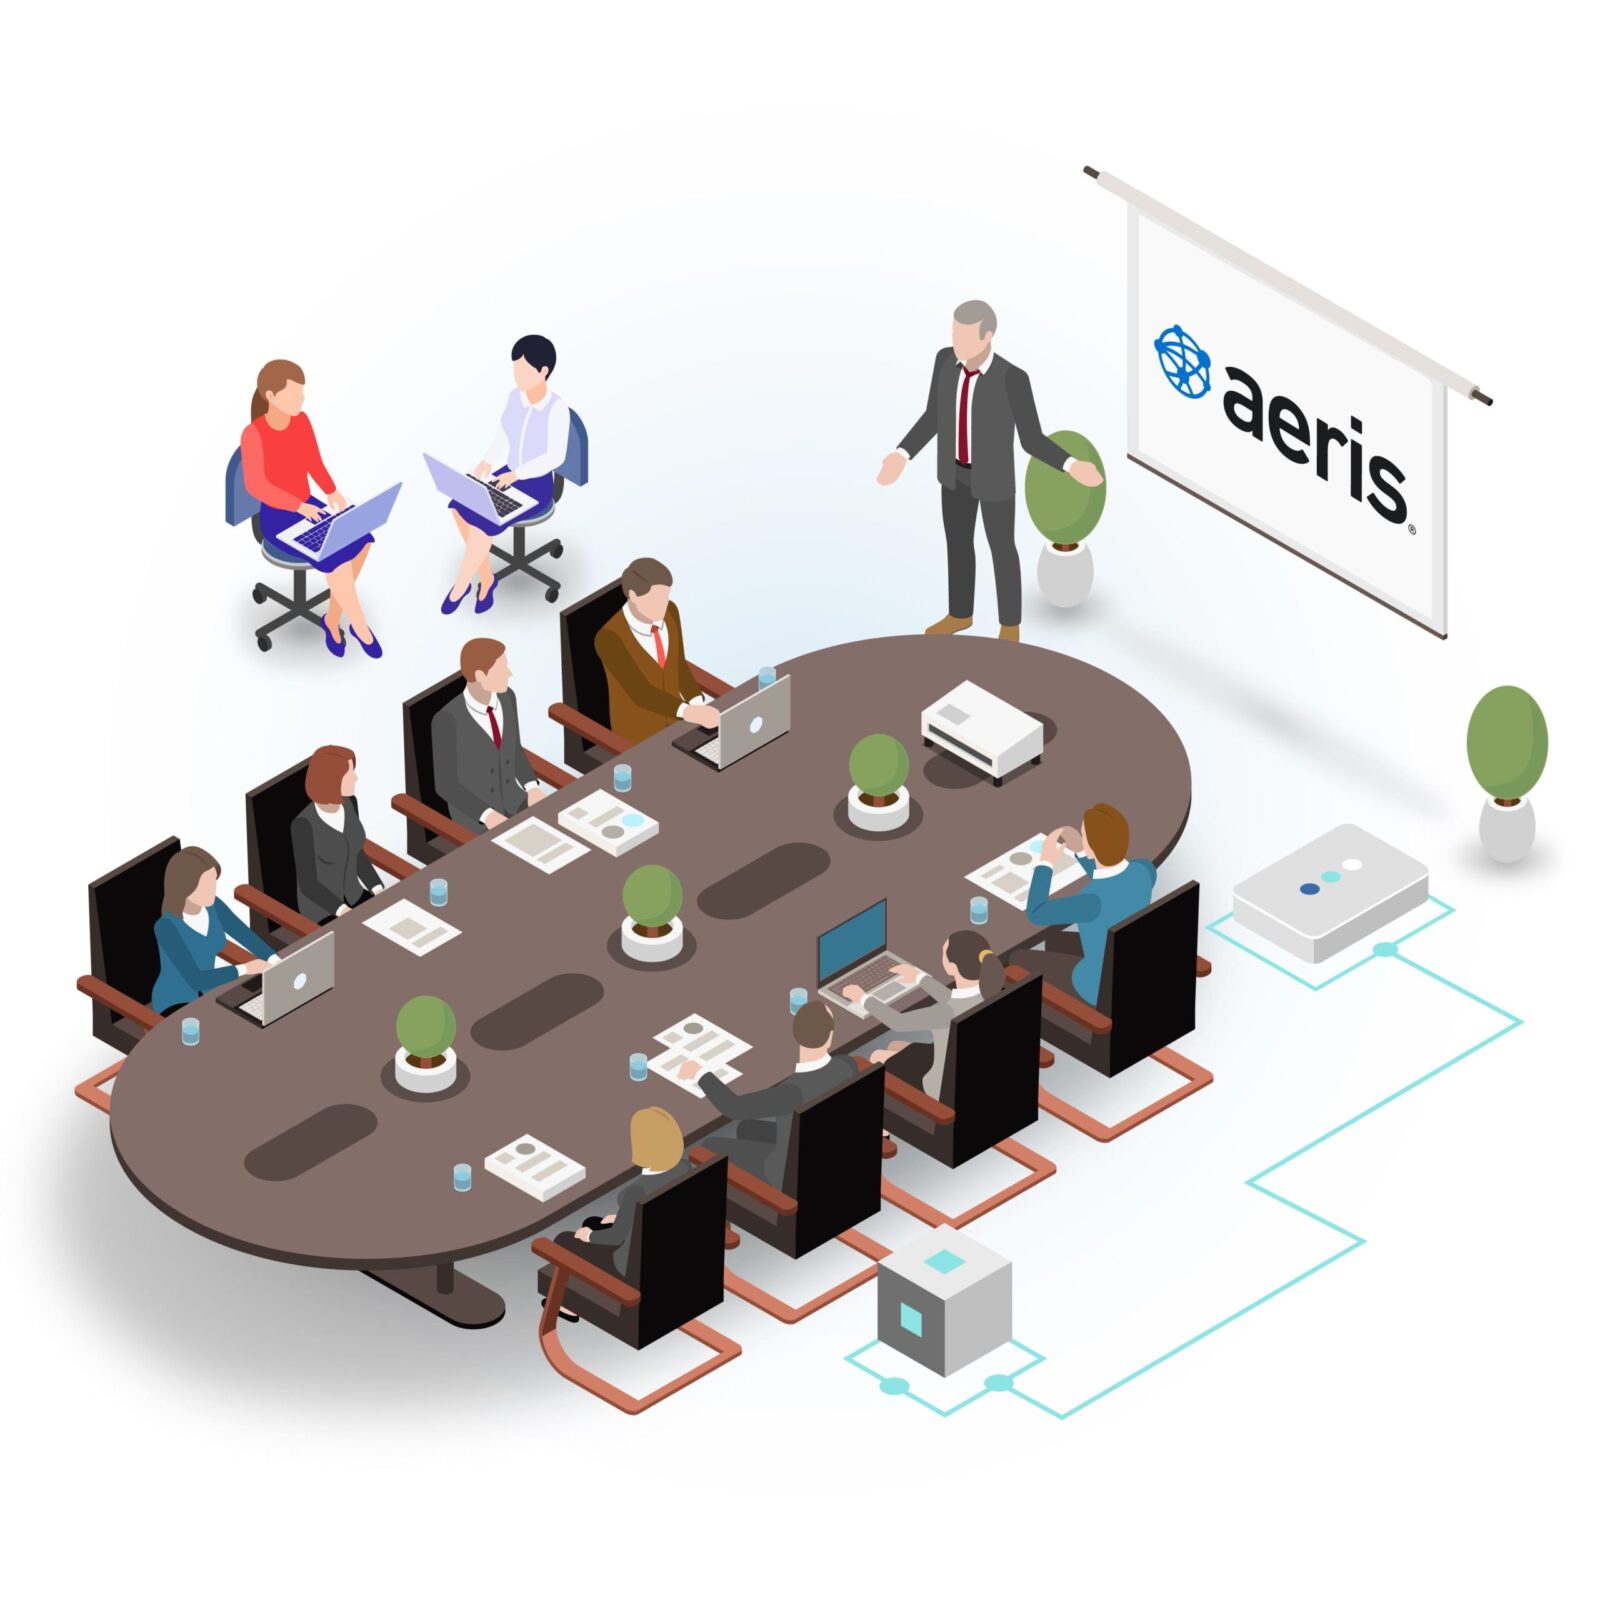 illustration of aeris employees in a conference room